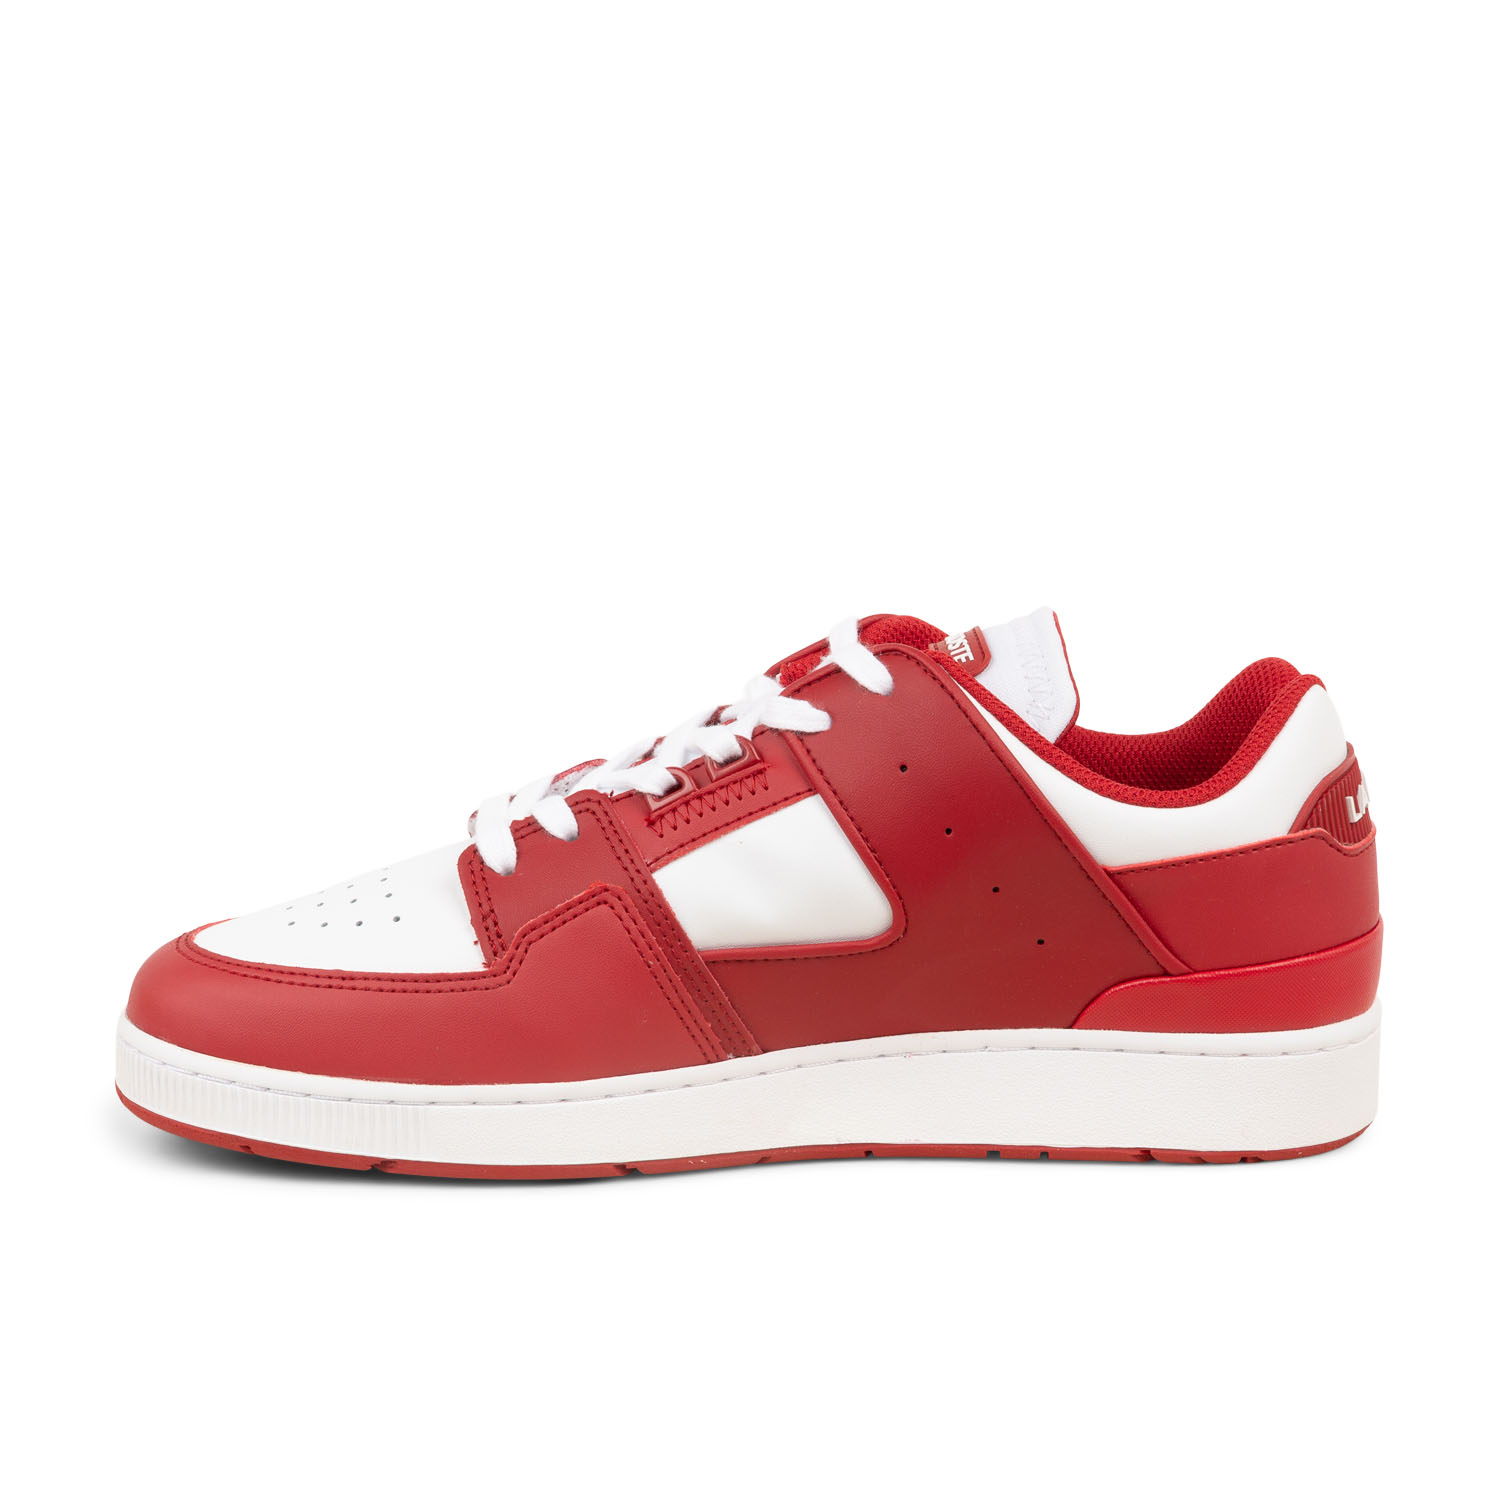 04 - COURT CAGE - LACOSTE -  - Cuir